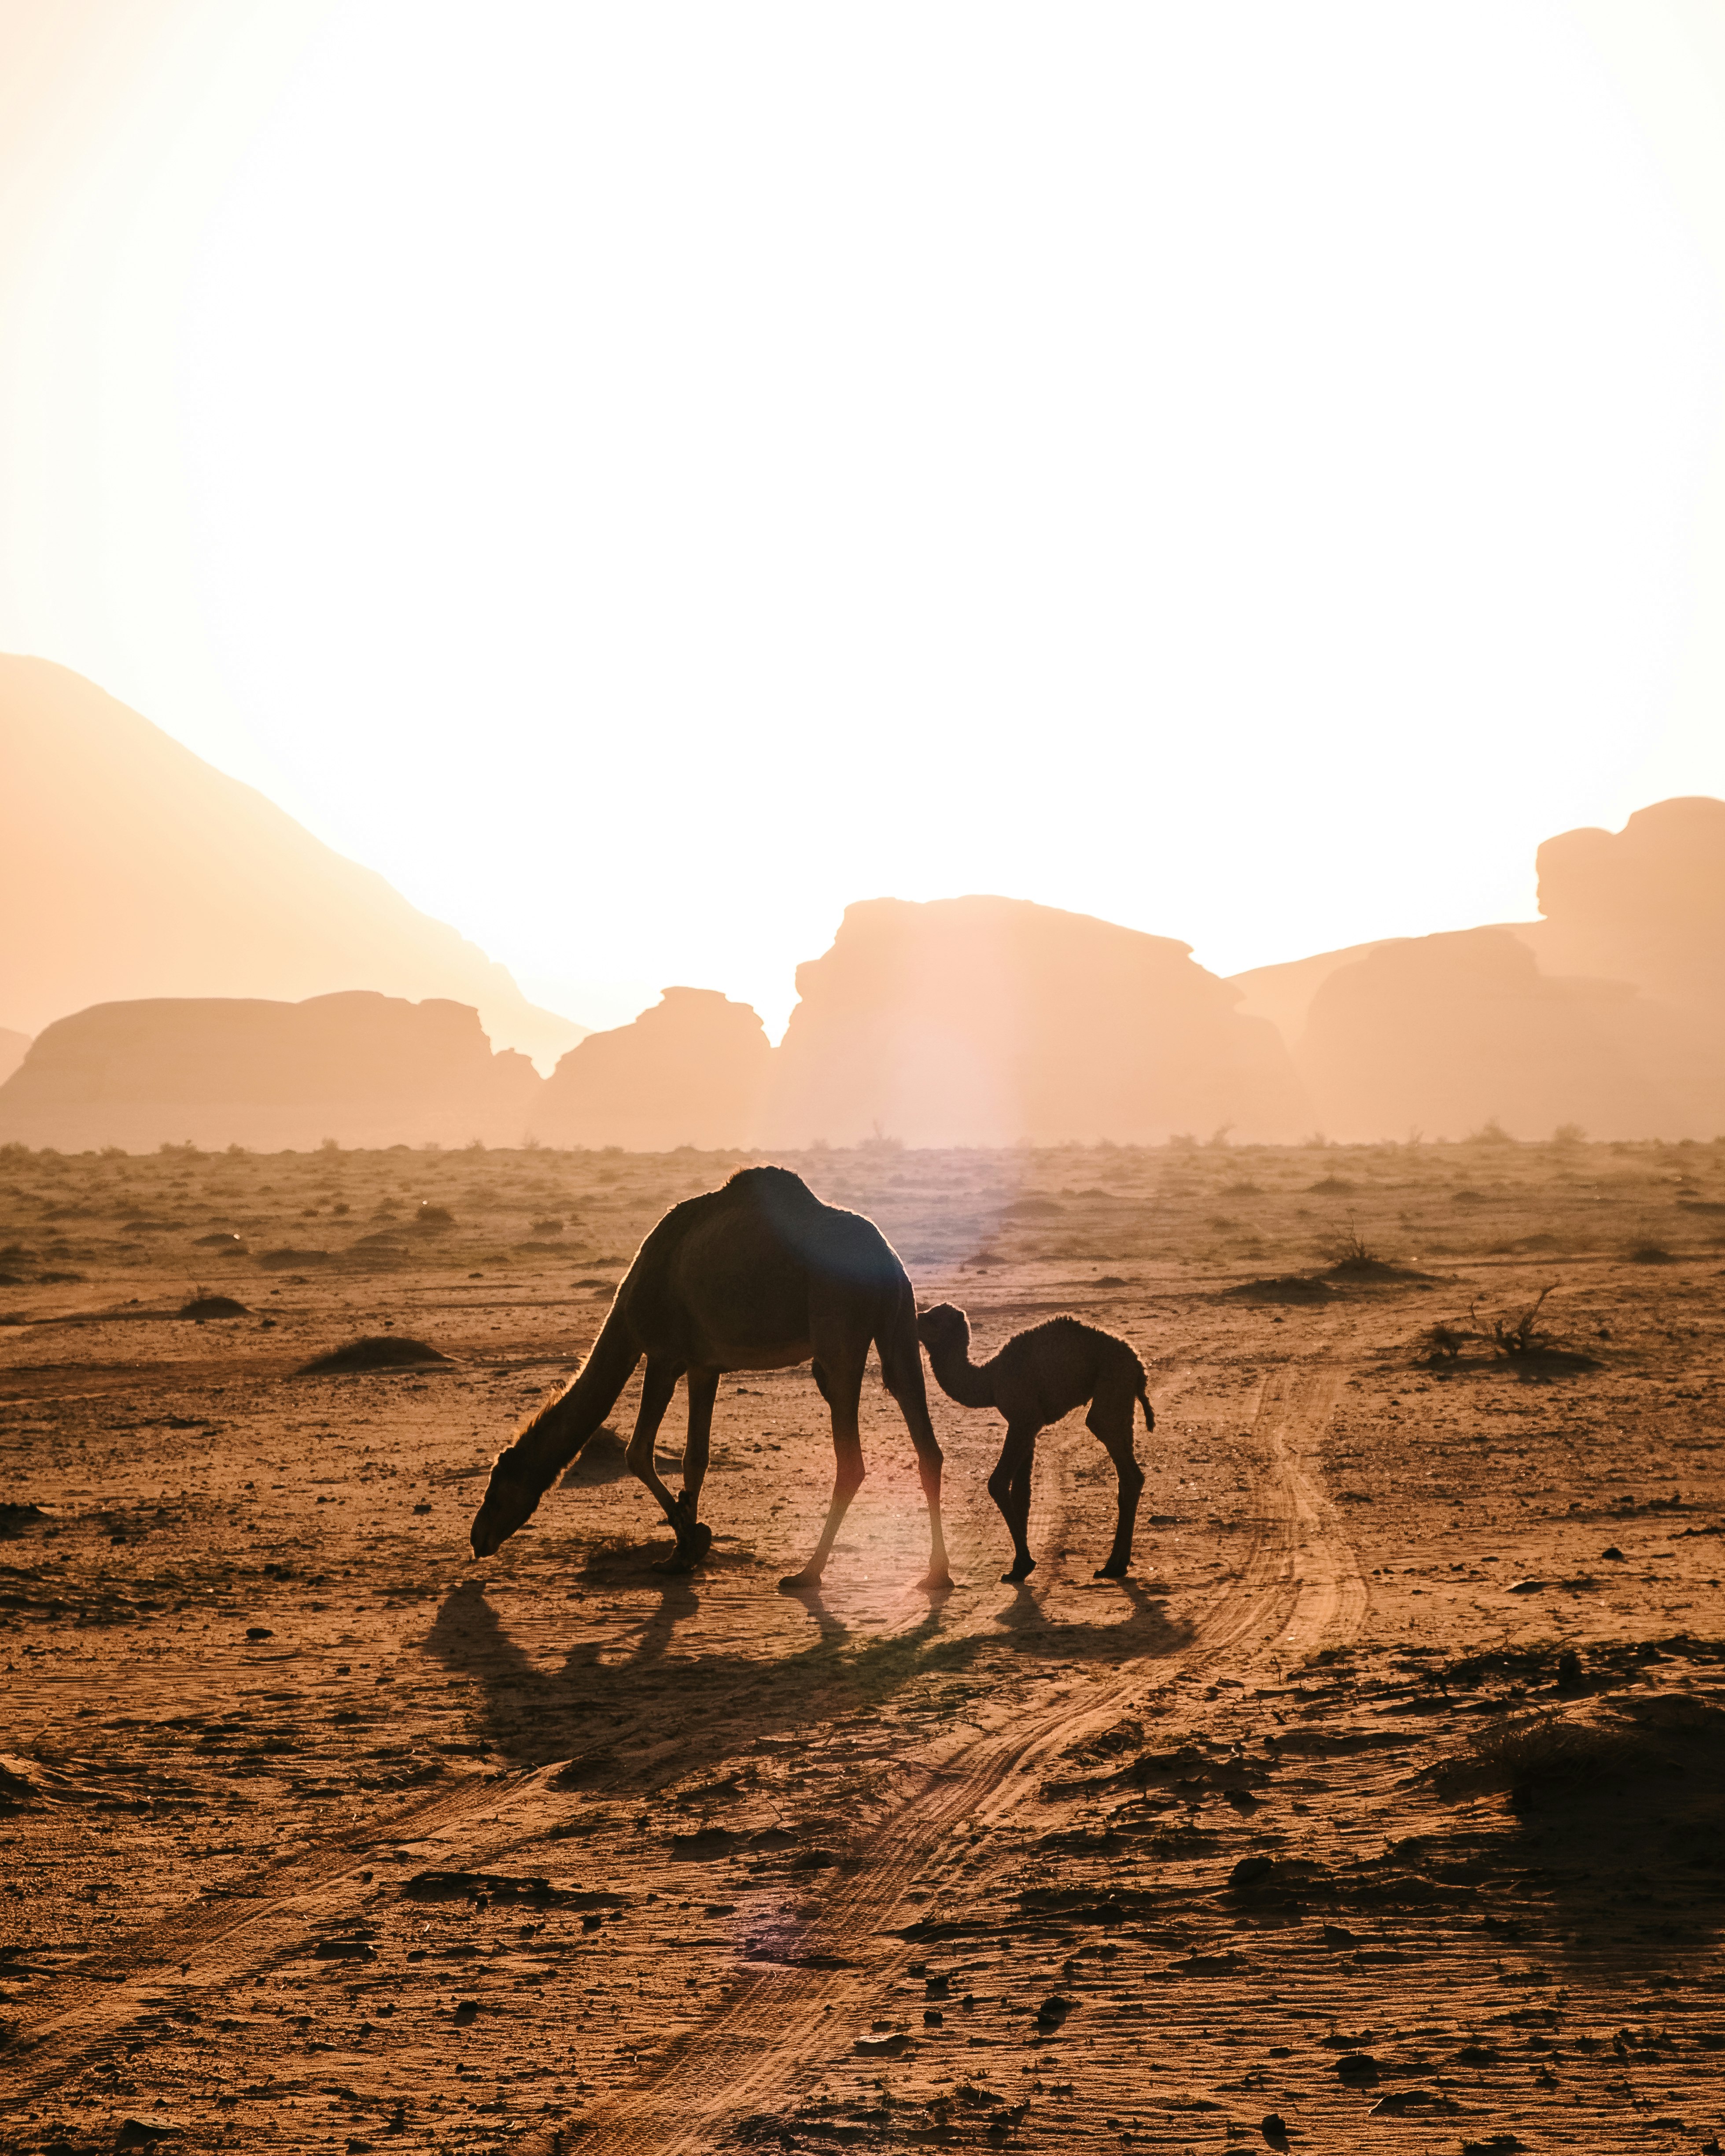 When we were in the Wadi Rum desert, we spent the night in a bedouin camp right in the middle of the desert. We slept in tents under the desert stars. We woke up before sunrise and headed for a walk. Seeing these camels with the sun rising behind them was something out of this world. A memory I will forever treasure. Glad I had my camera with me!